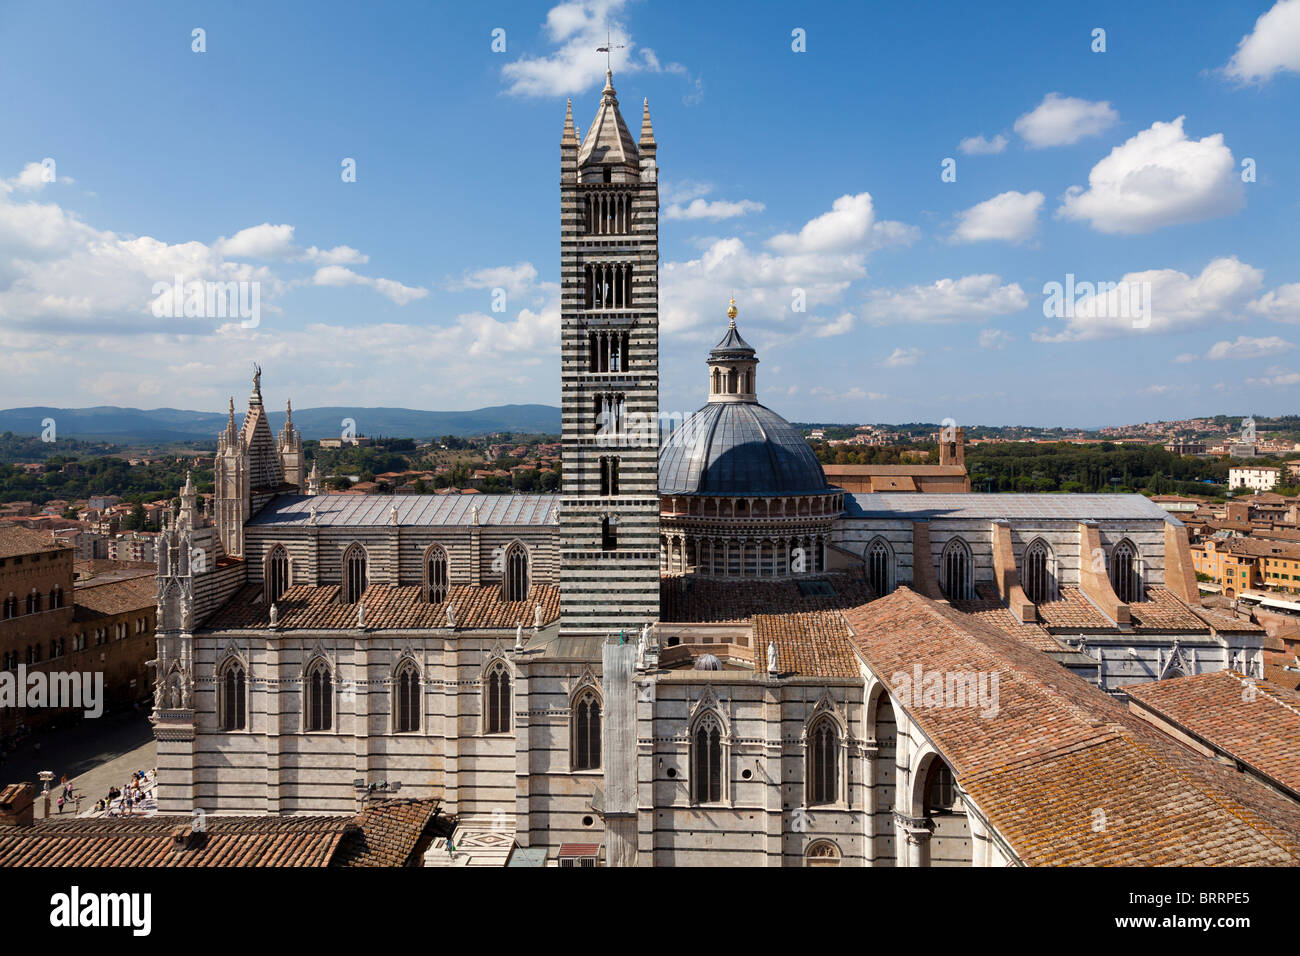 A full frontal  view of the iconic cathedral in Sienna, and its famous dome in Tuscany Italy on a bright sunny day Stock Photo